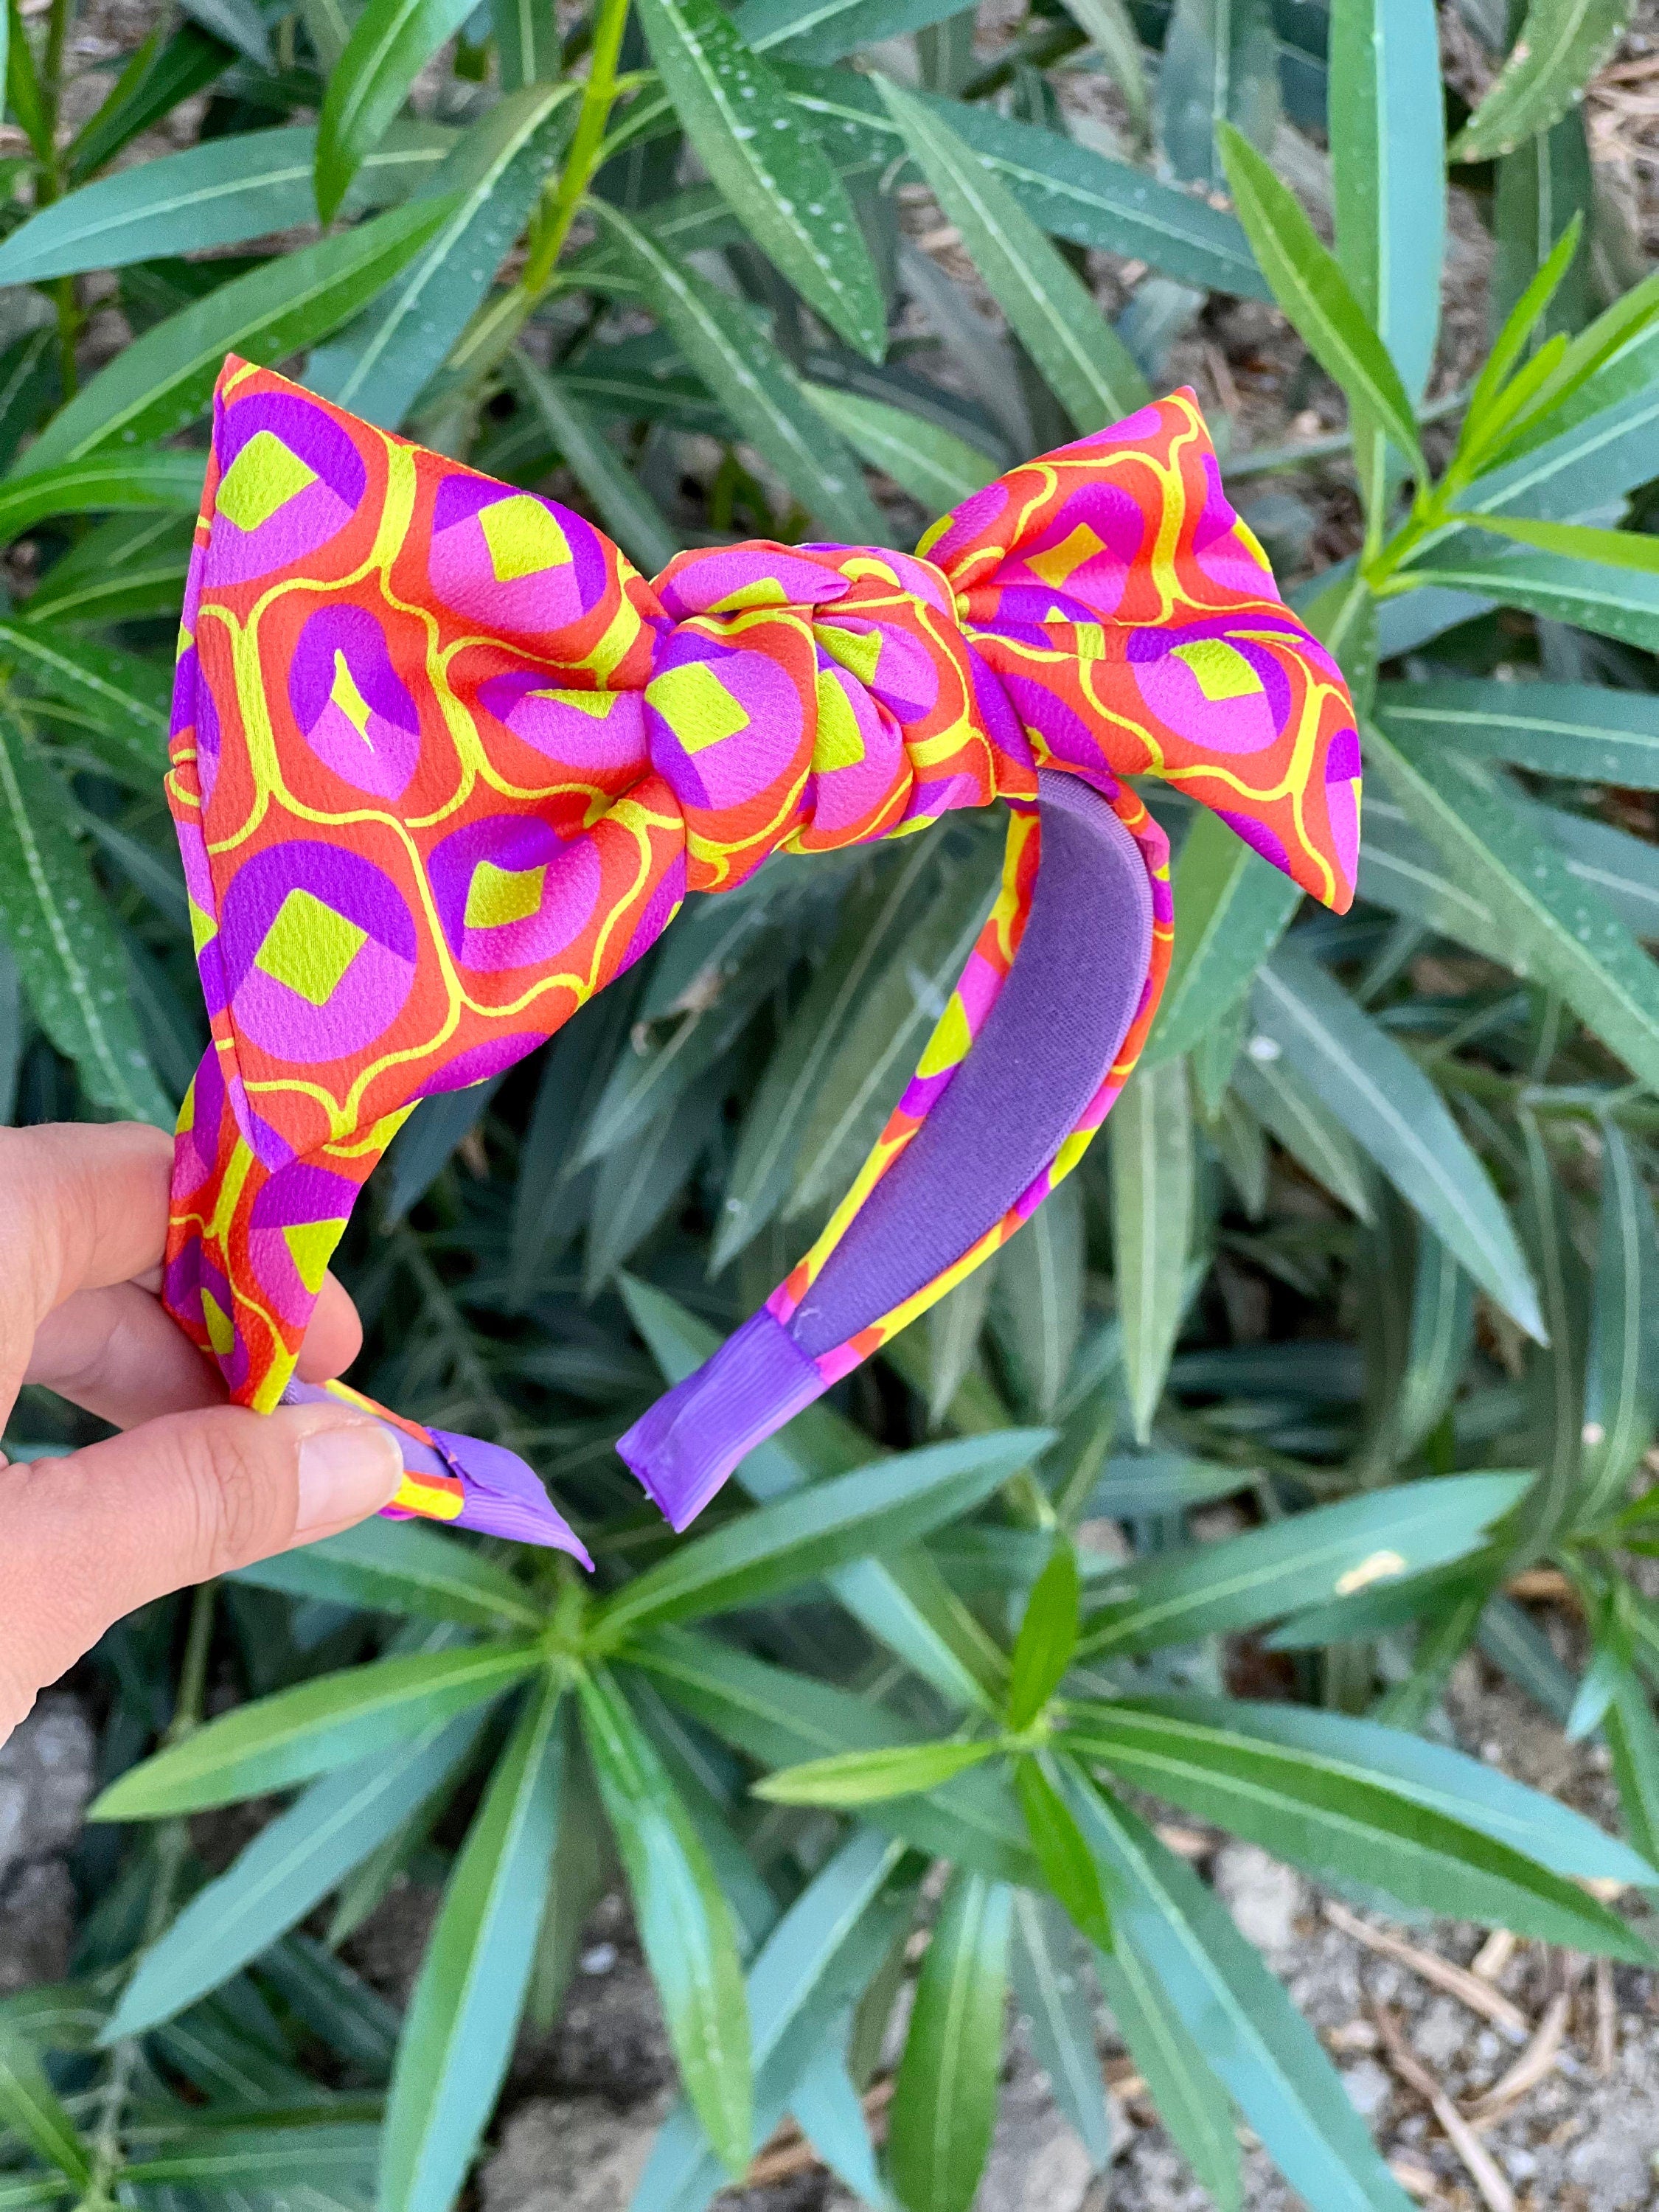 Stay stylish and comfortable with this purple orange yellow patterned hair tie headband.